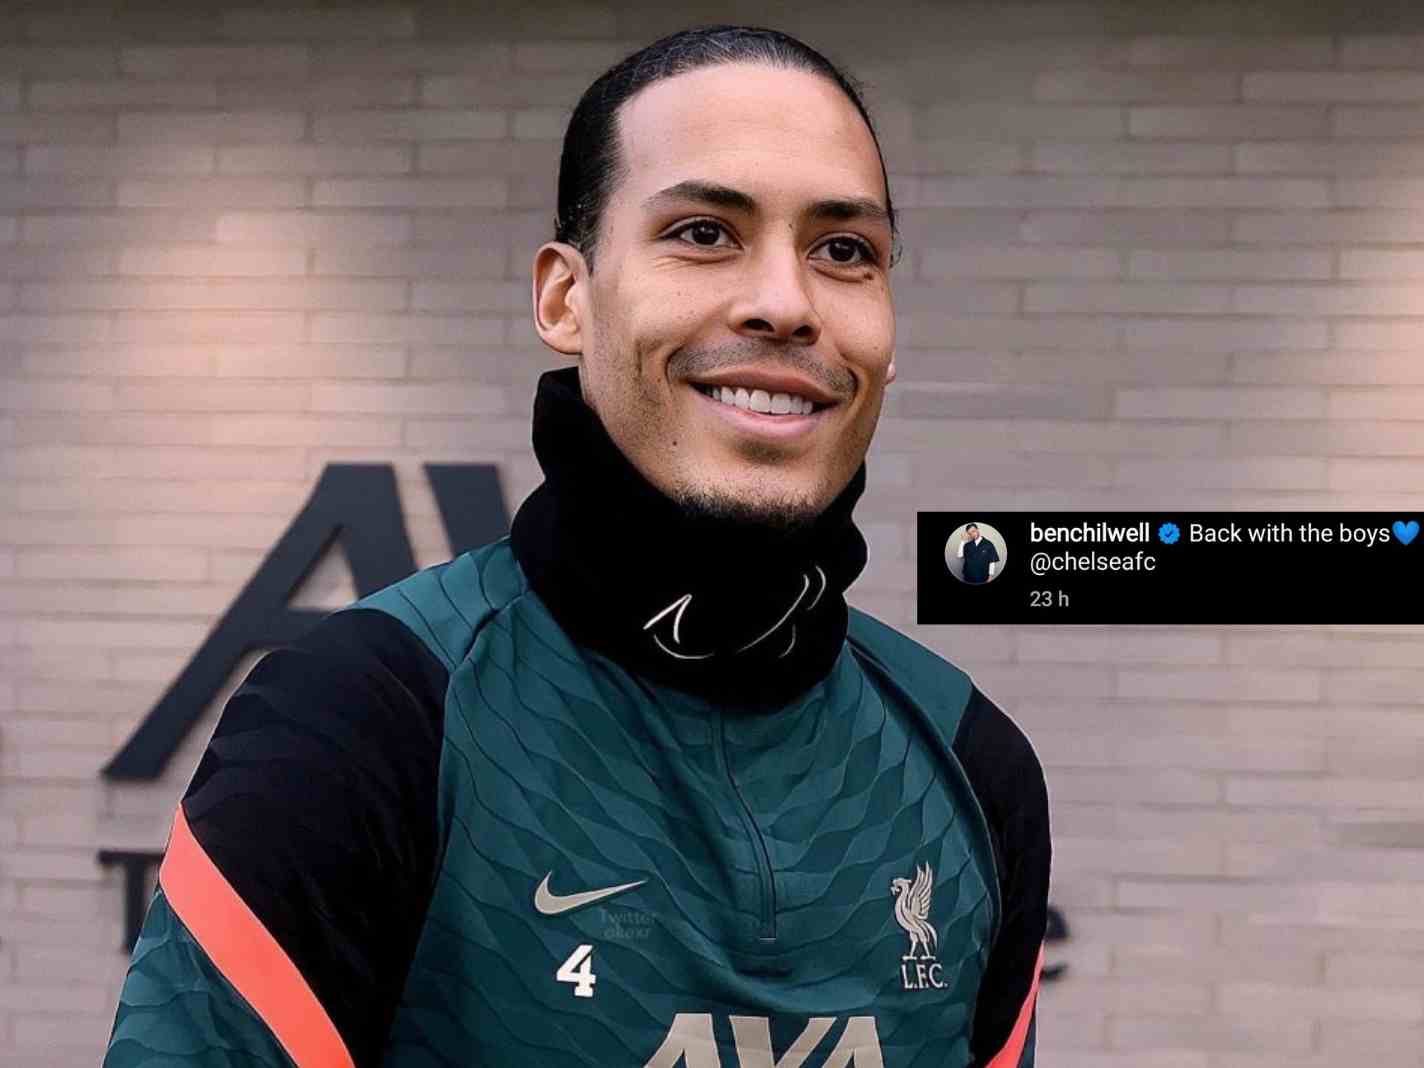 ACL survivor Virgil van Dijk supports Ben Chilwell with clapping emoji